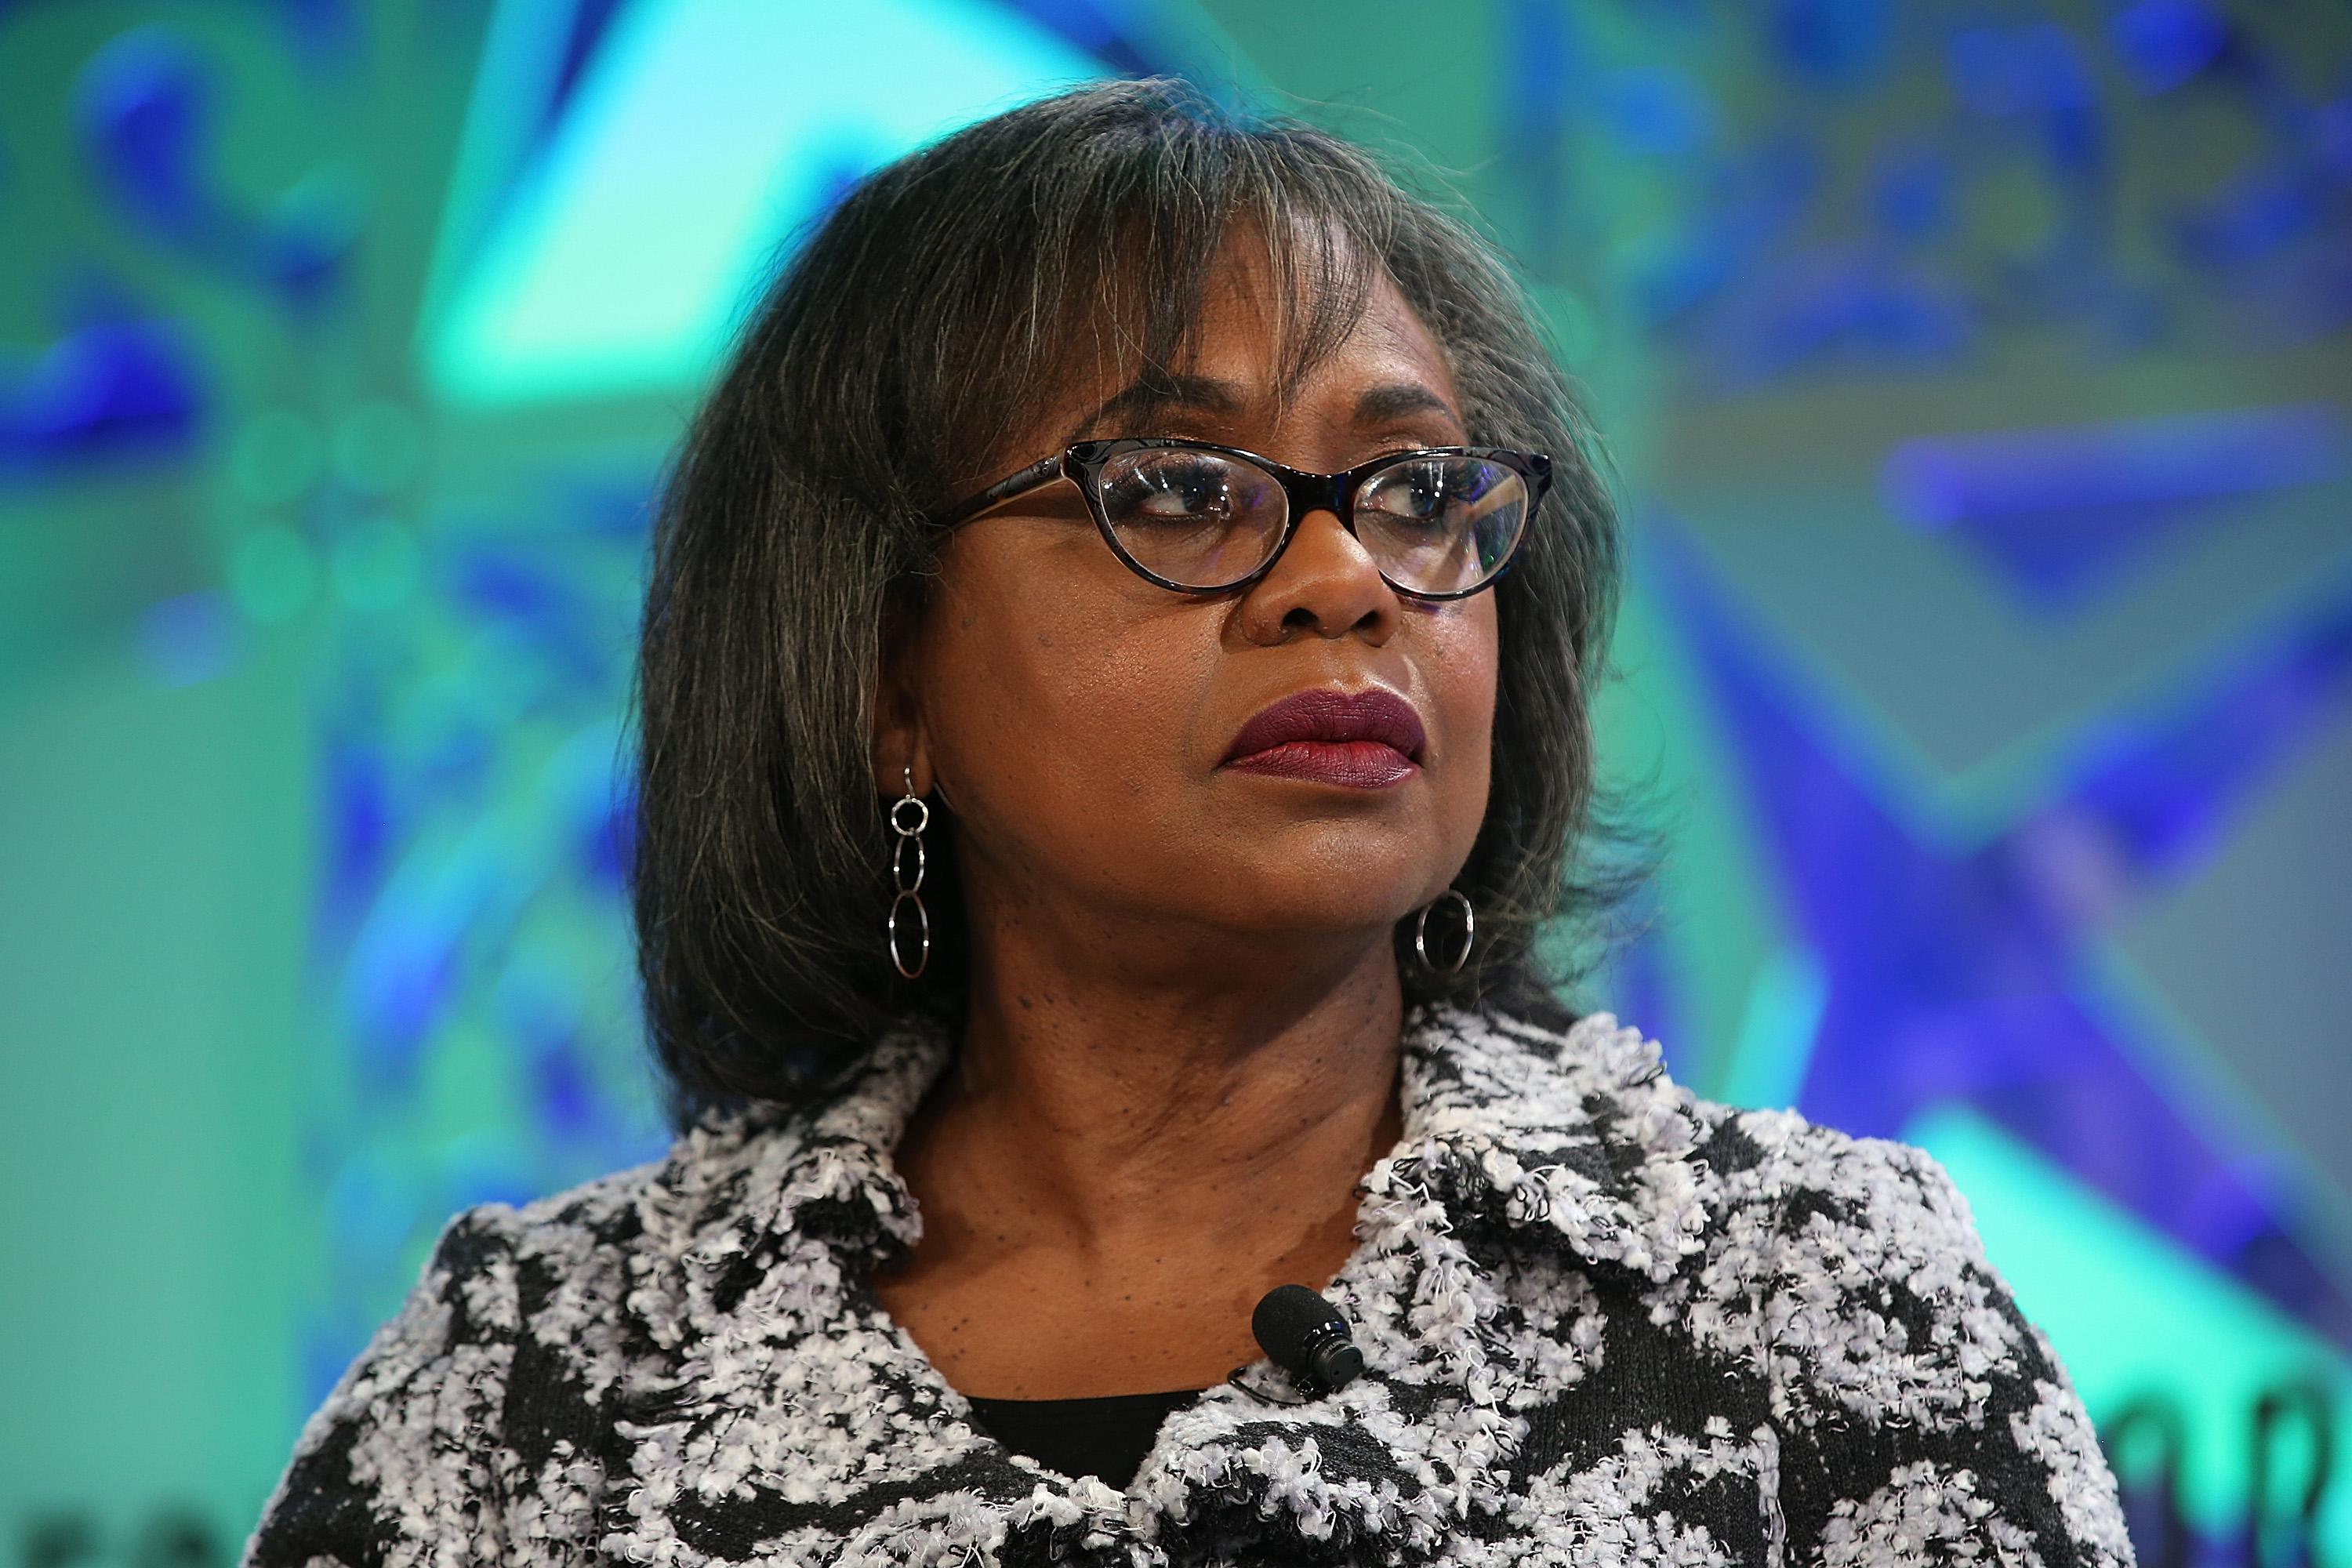 Anita Hill speaks onstage at the Fortune Most Powerful Women Summit 2018 on Oct. 2, 2018 in Laguna Niguel, California.